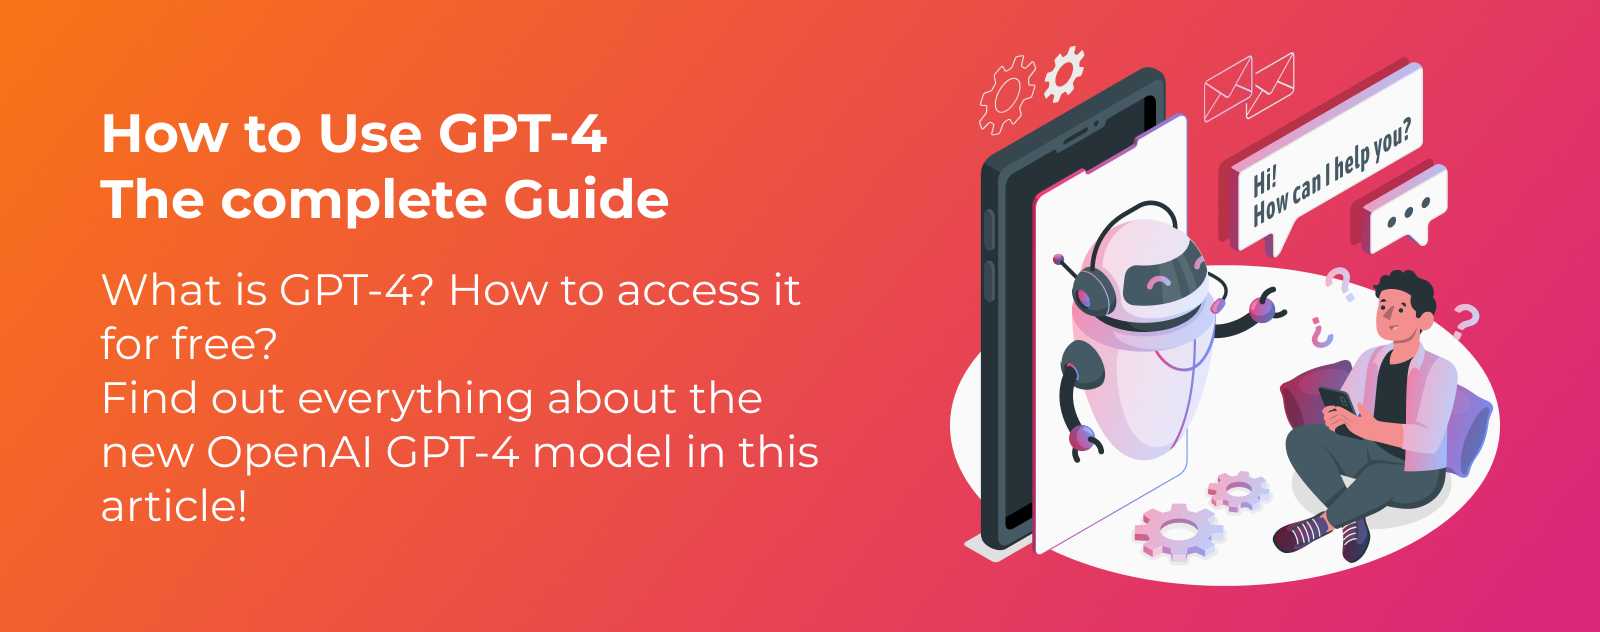 How to Use GPT-4? The Complete Guide